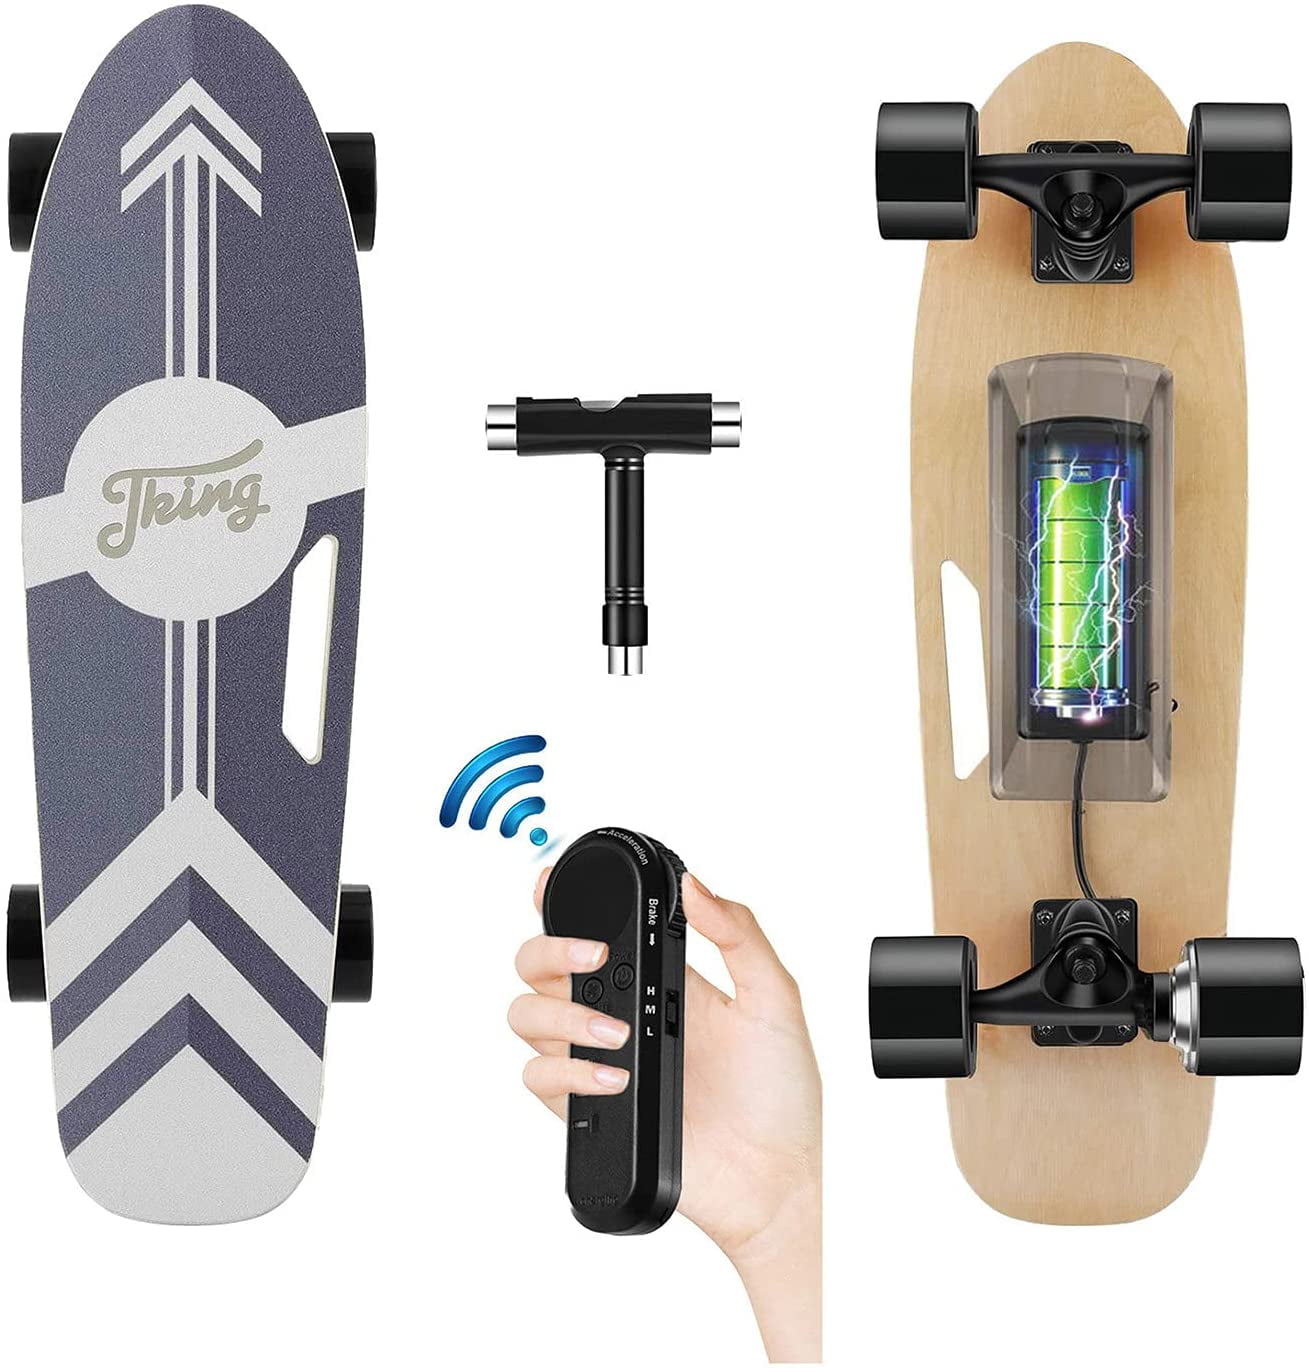 Details about   Maple Deck Electric Skateboard Longboard Crusier with Remote Controller B s h 84 